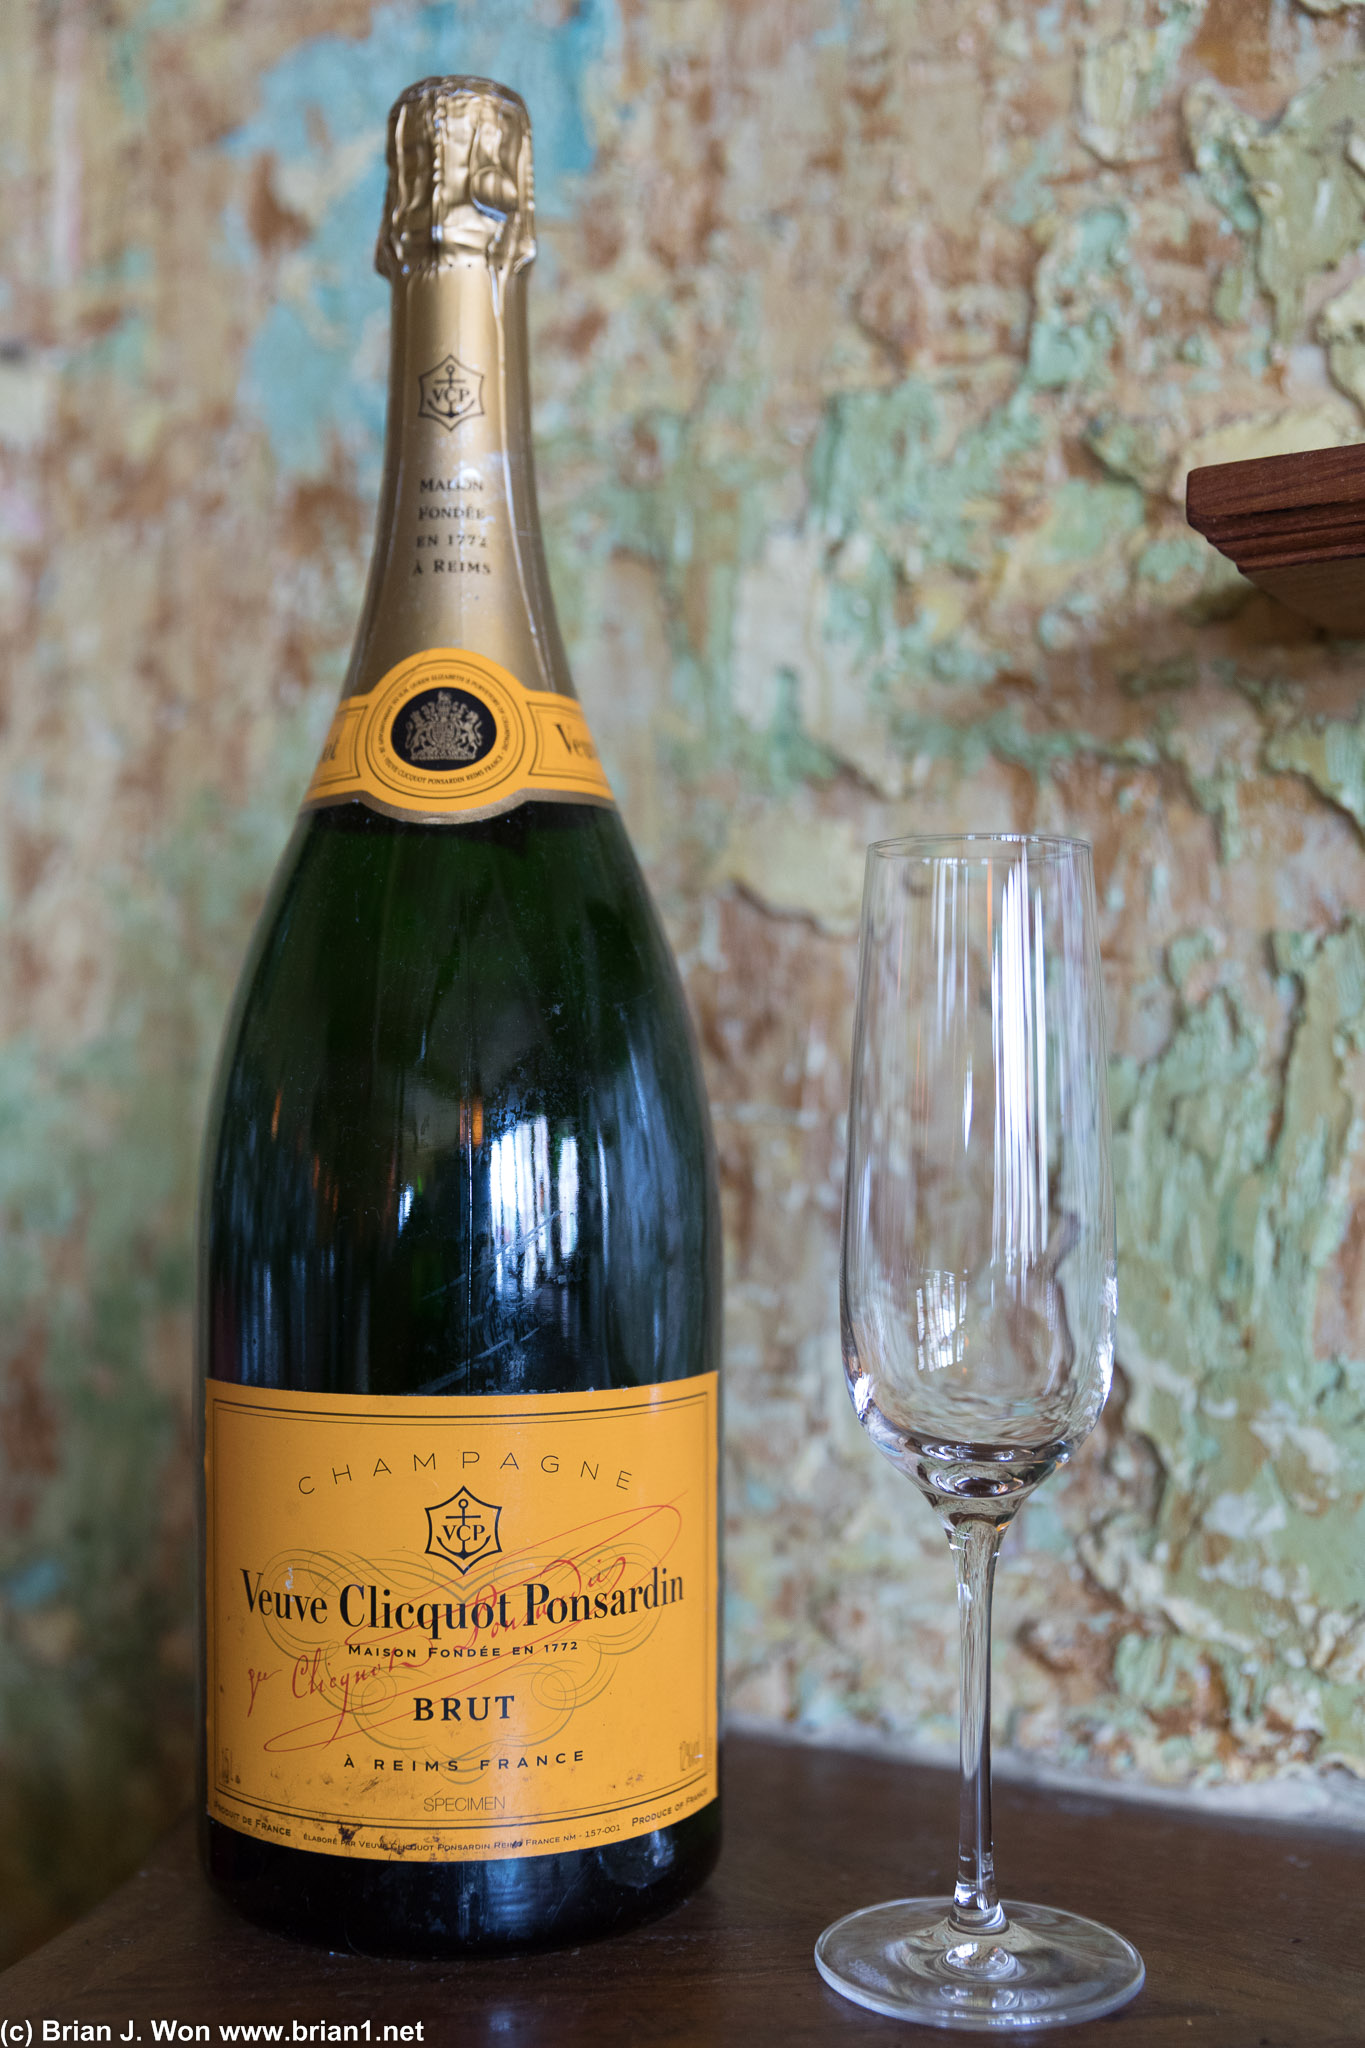 I think this bottle of Veuve Cliquot might be almost big enough to share.